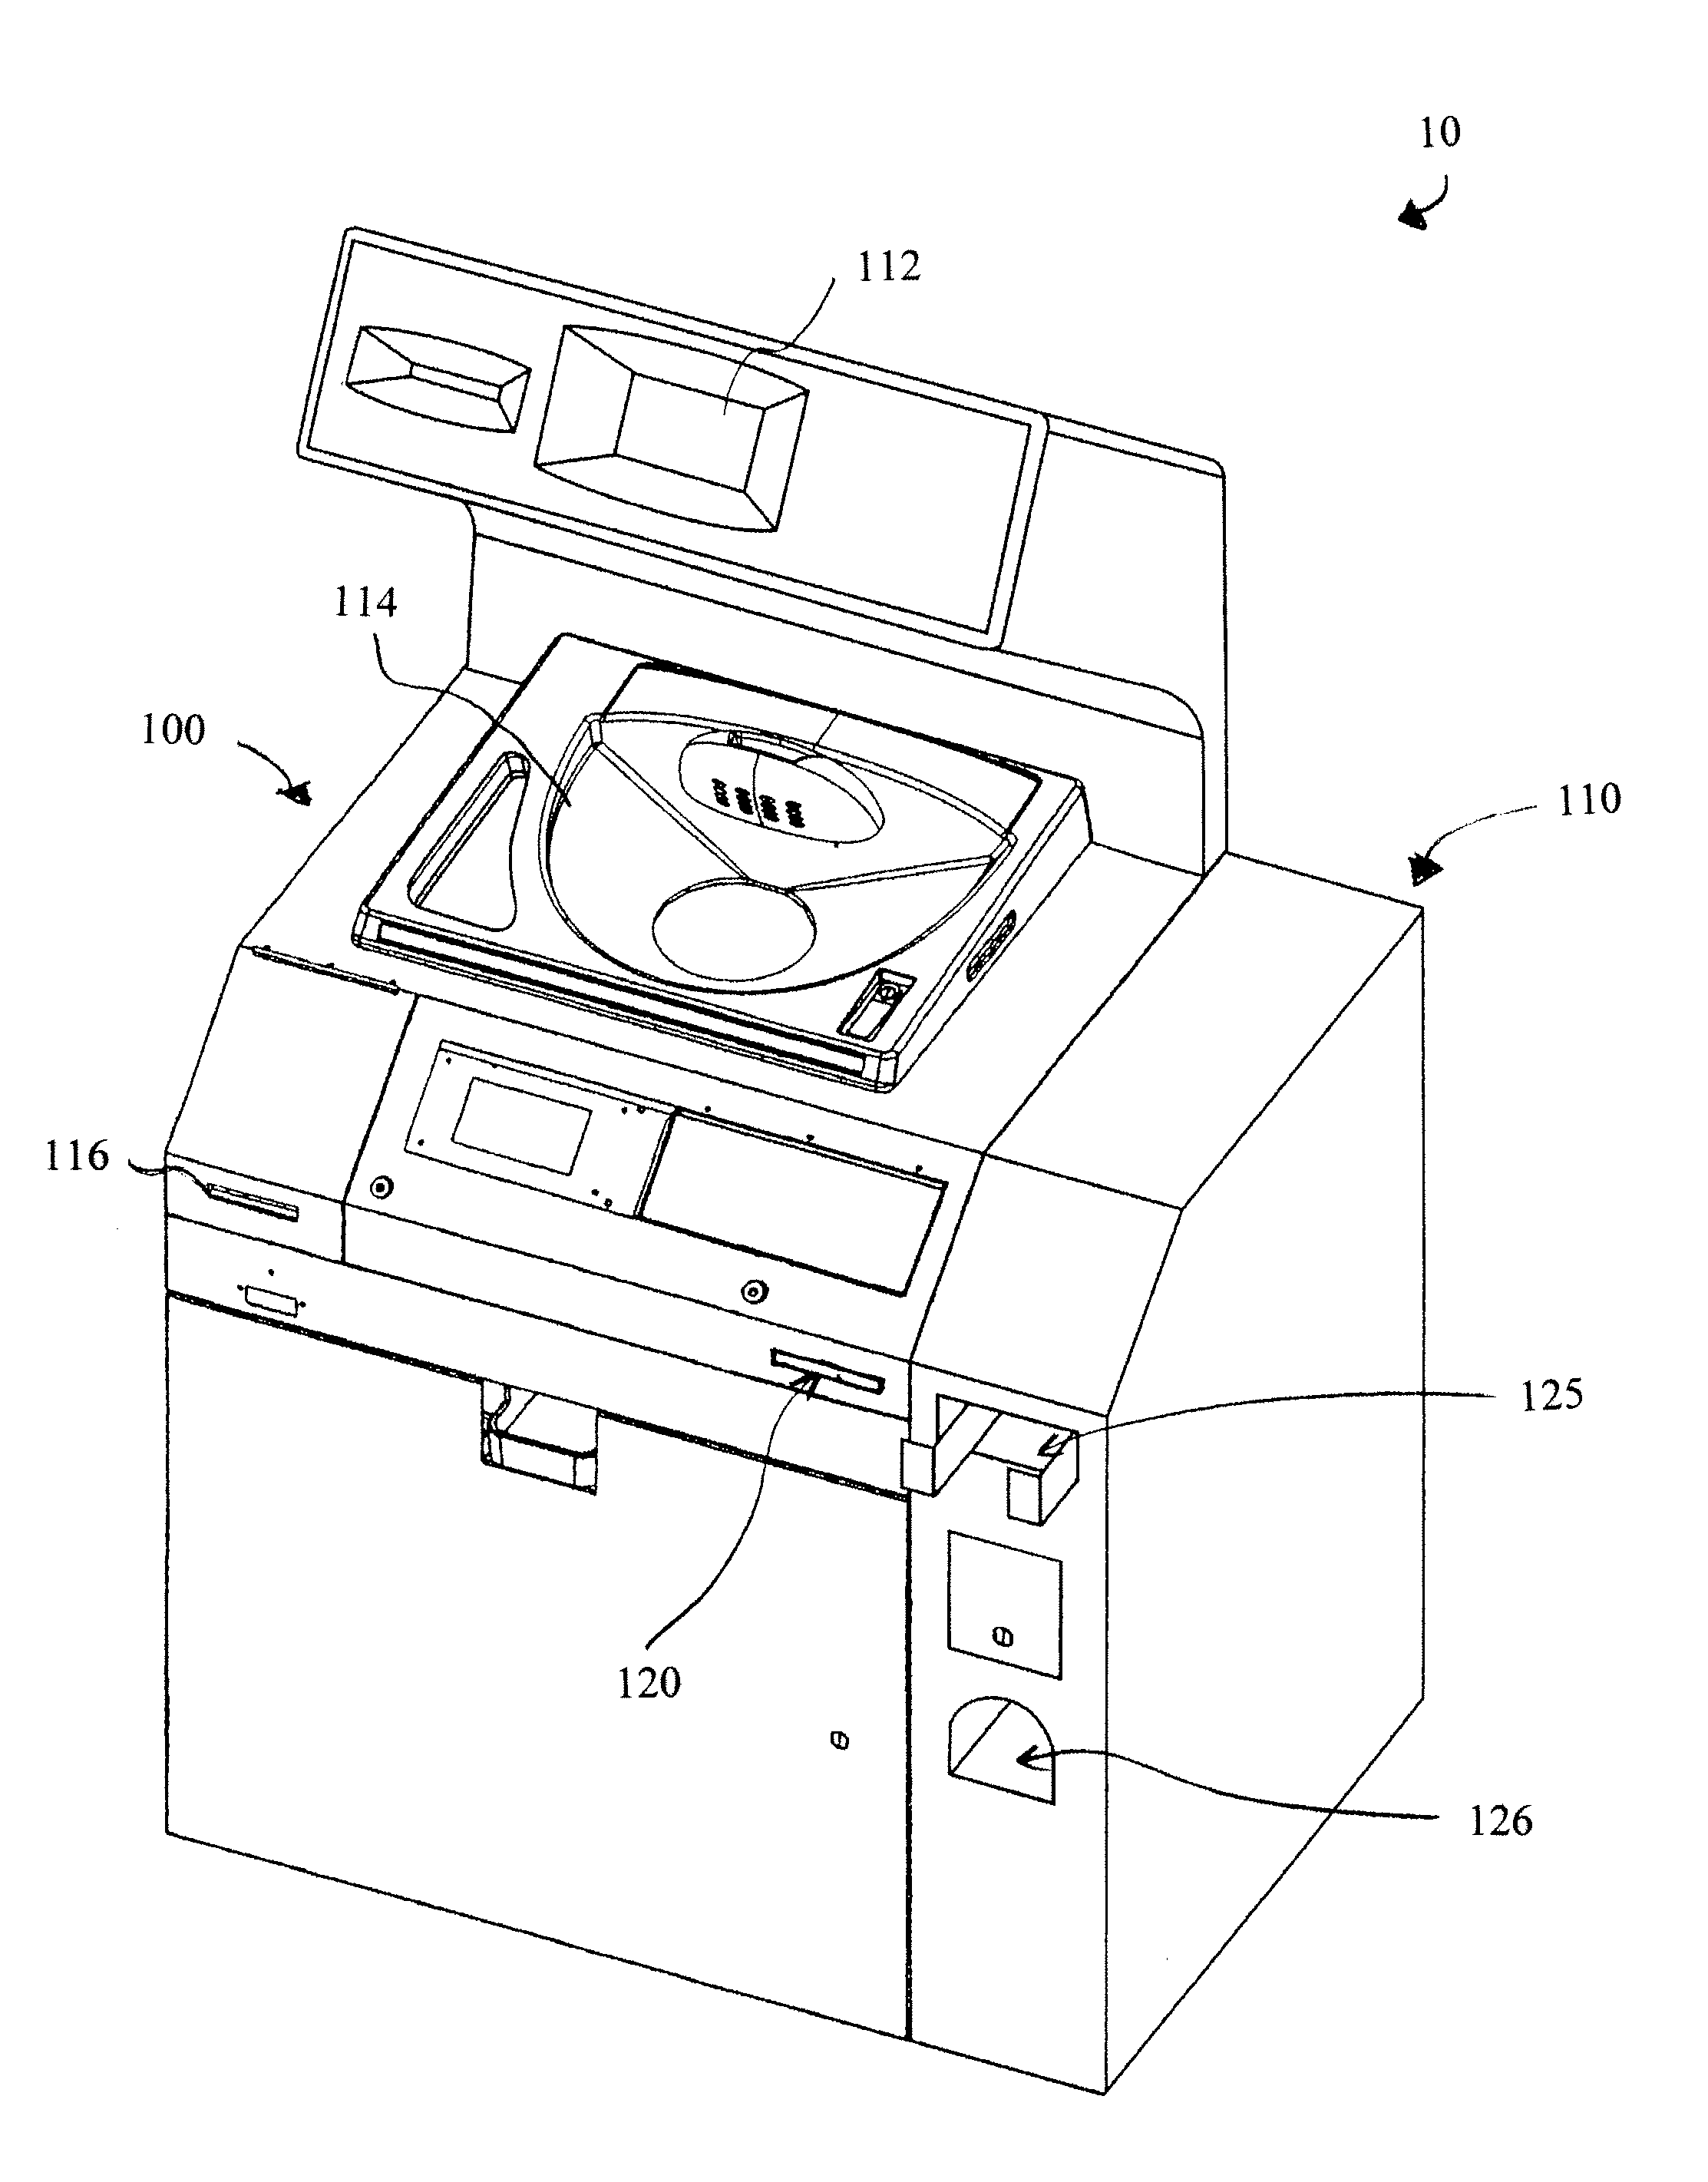 Apparatus, system and method for coin exchange